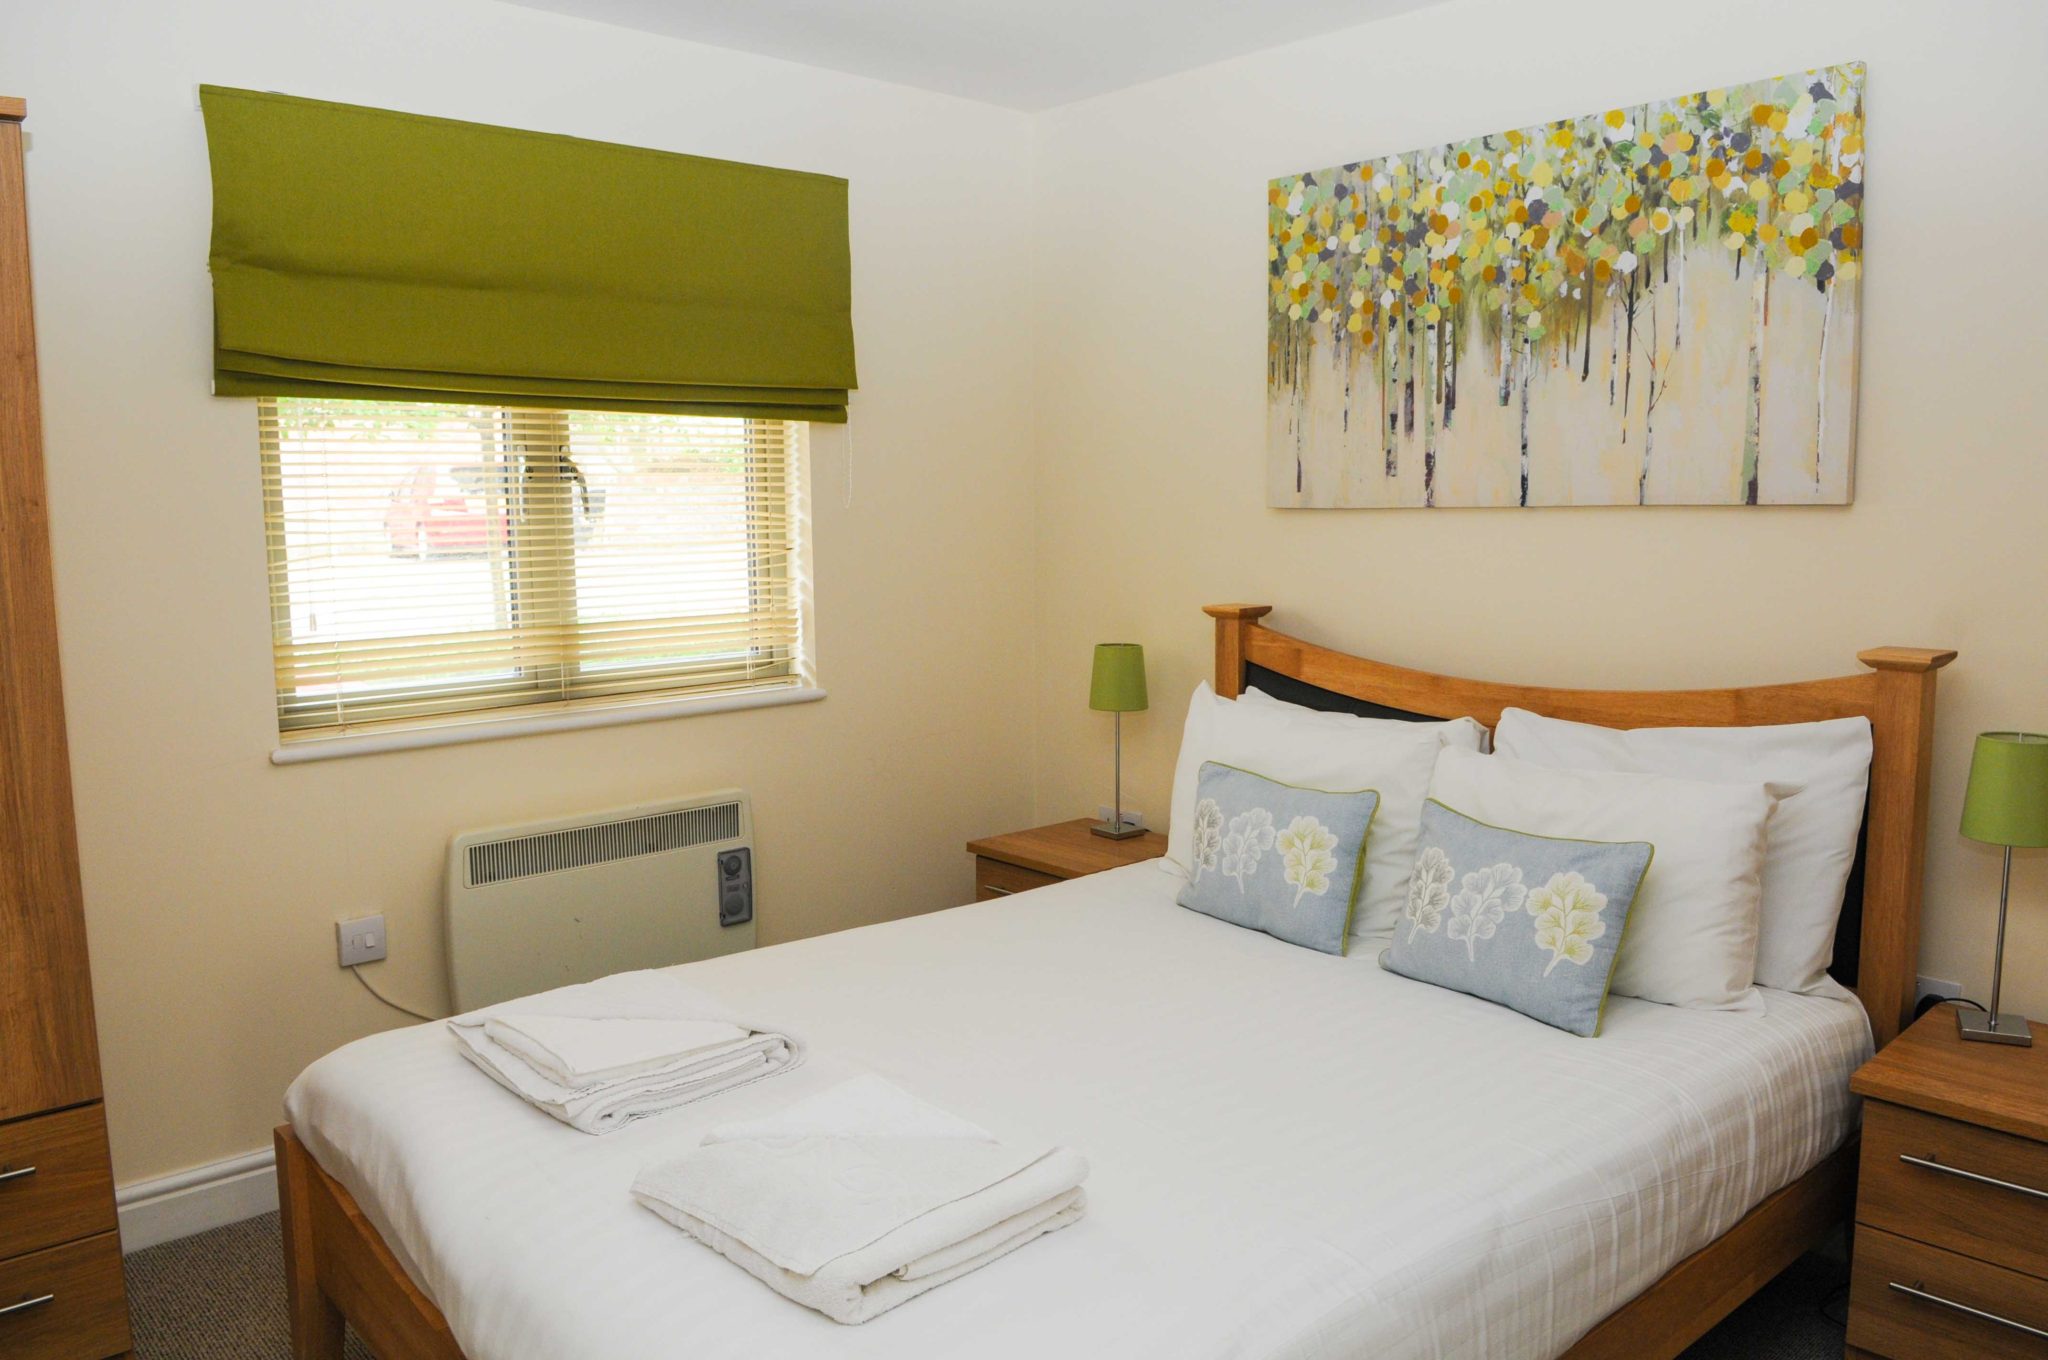 Bristol-Serviced-Accommodation-UK-|-Cheap-Cotham-Lawn-Apartments-|-Free-Wi-Fi|-Fully-Equipped-Kitchen-|-Parking-|0208-6913920|-Urban-Stay